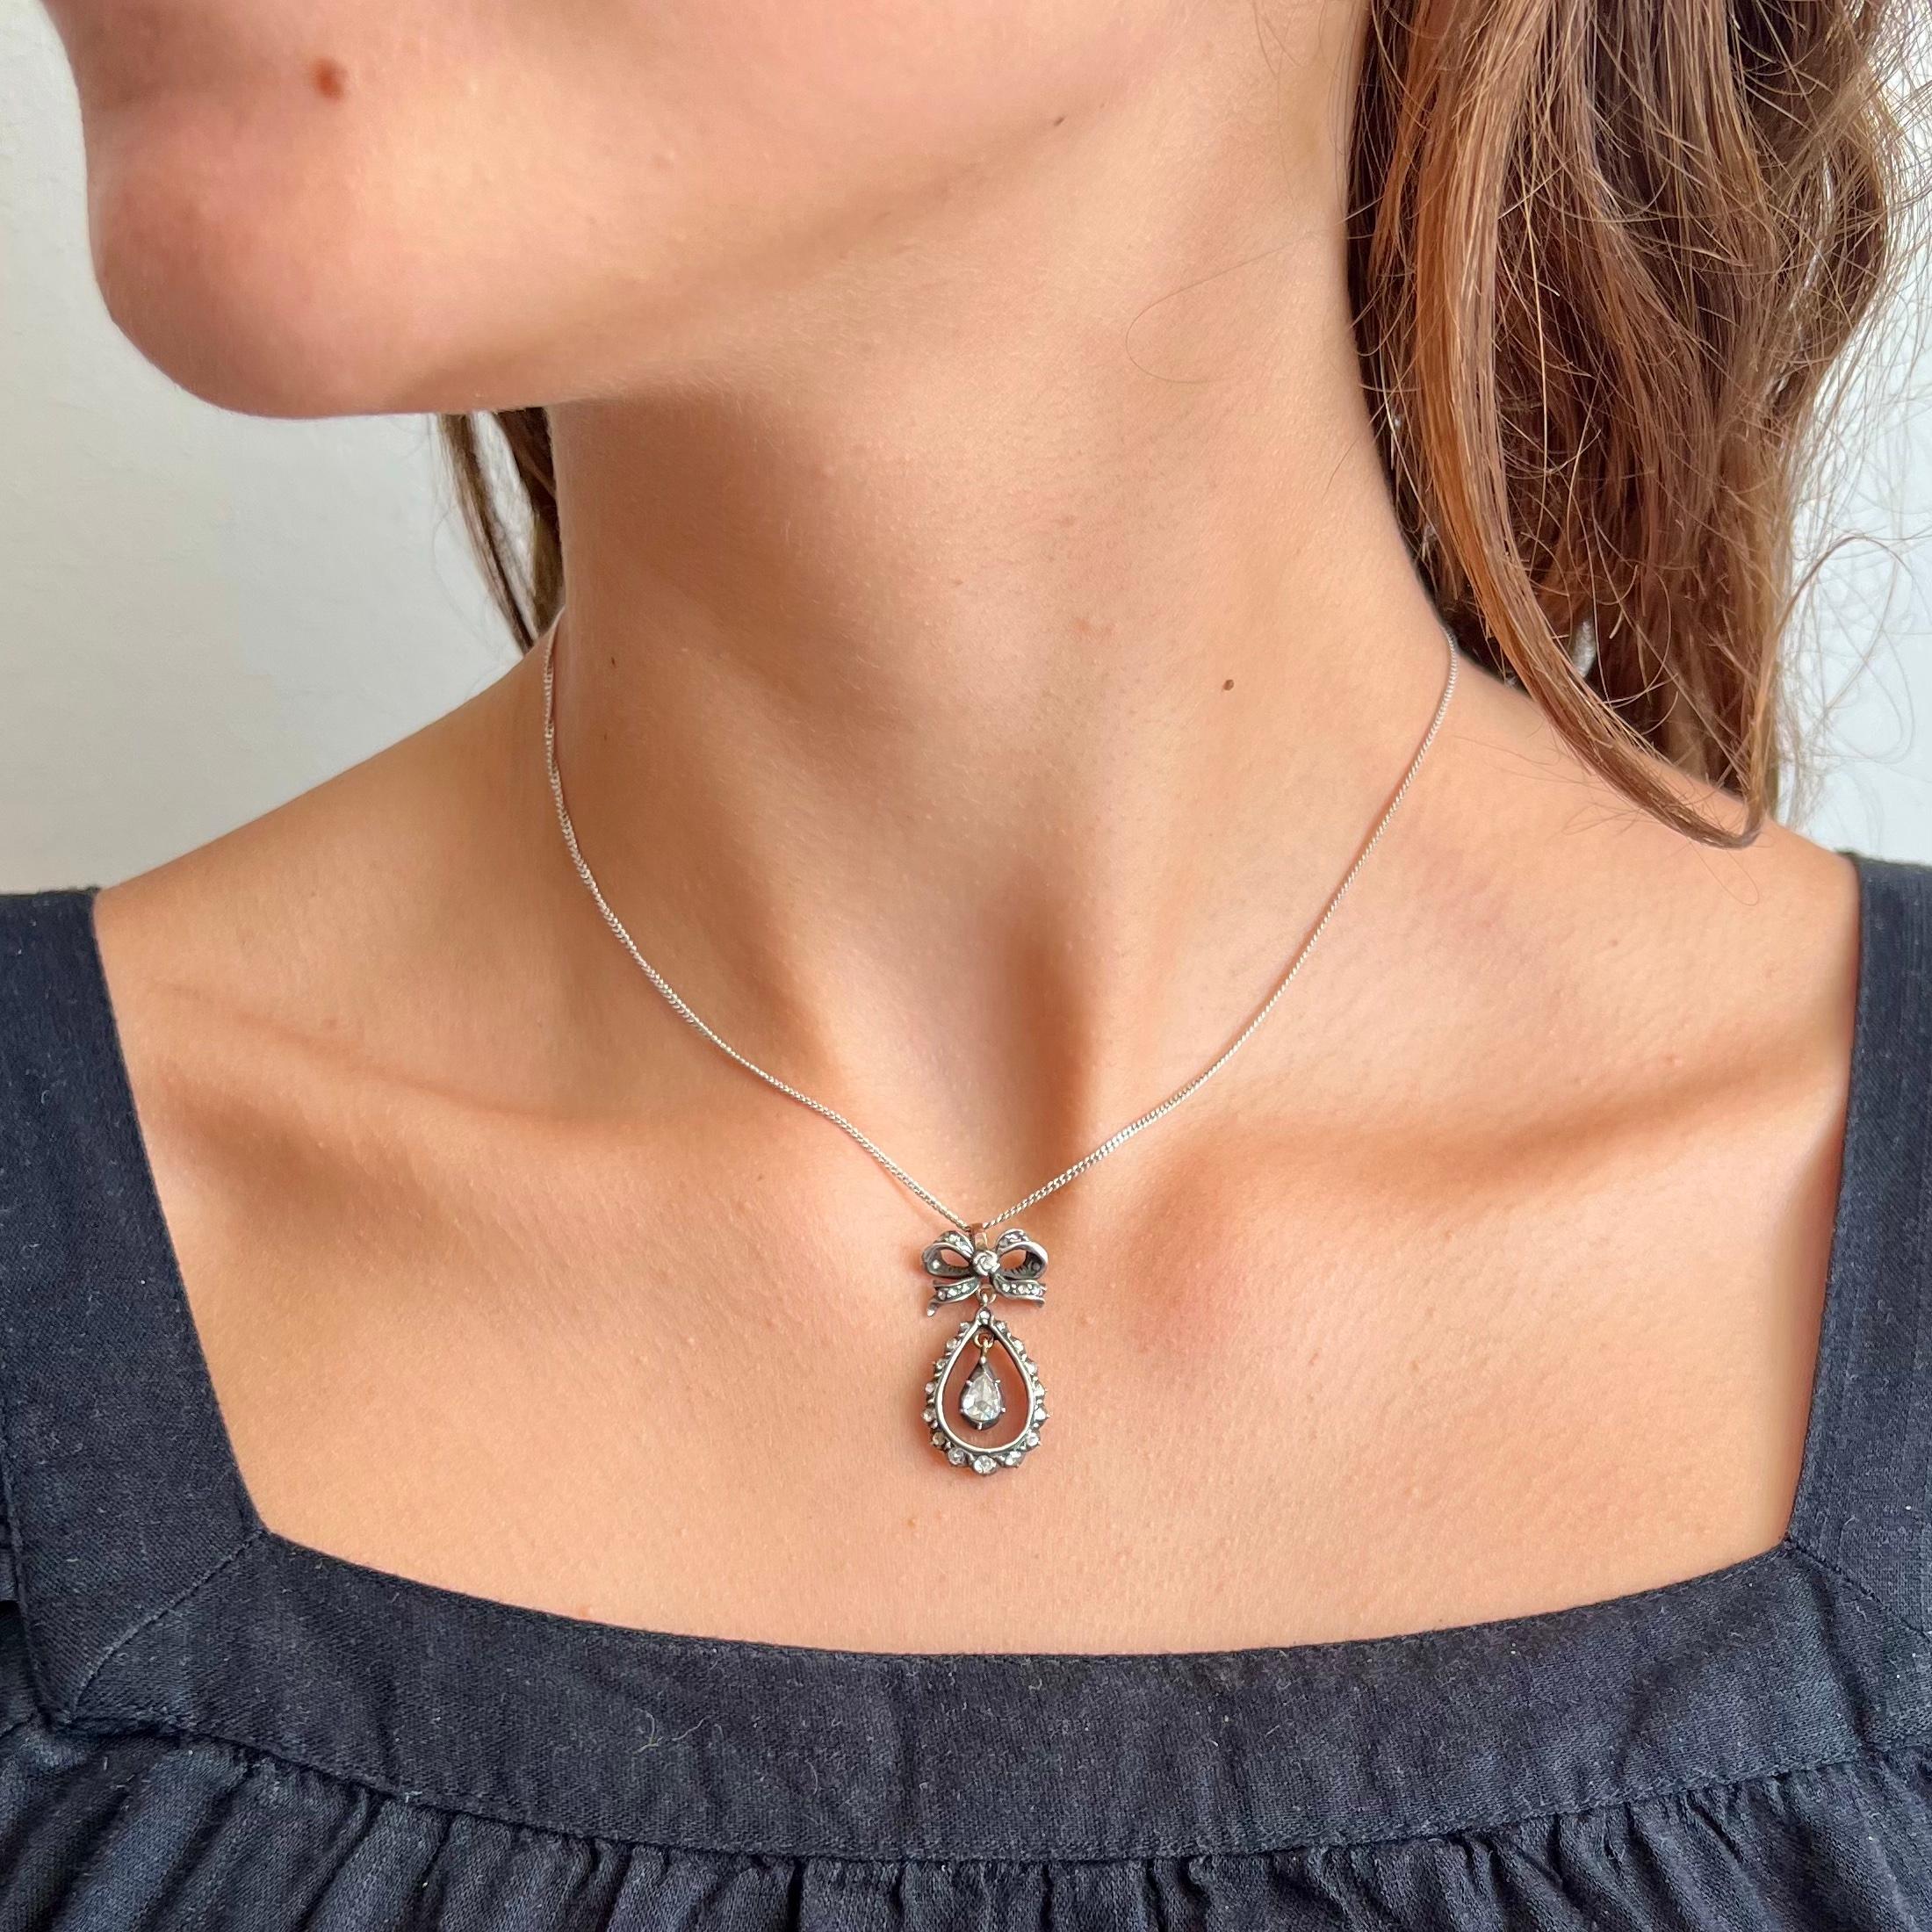 This antique Victorian drop-shaped bow pendant designed with rose cut diamonds is truly a treasure to behold. The pendant is created with rose cut diamonds set in a teardrop shape surrounding a dangling tear drop shape featuring a pear cut diamond.